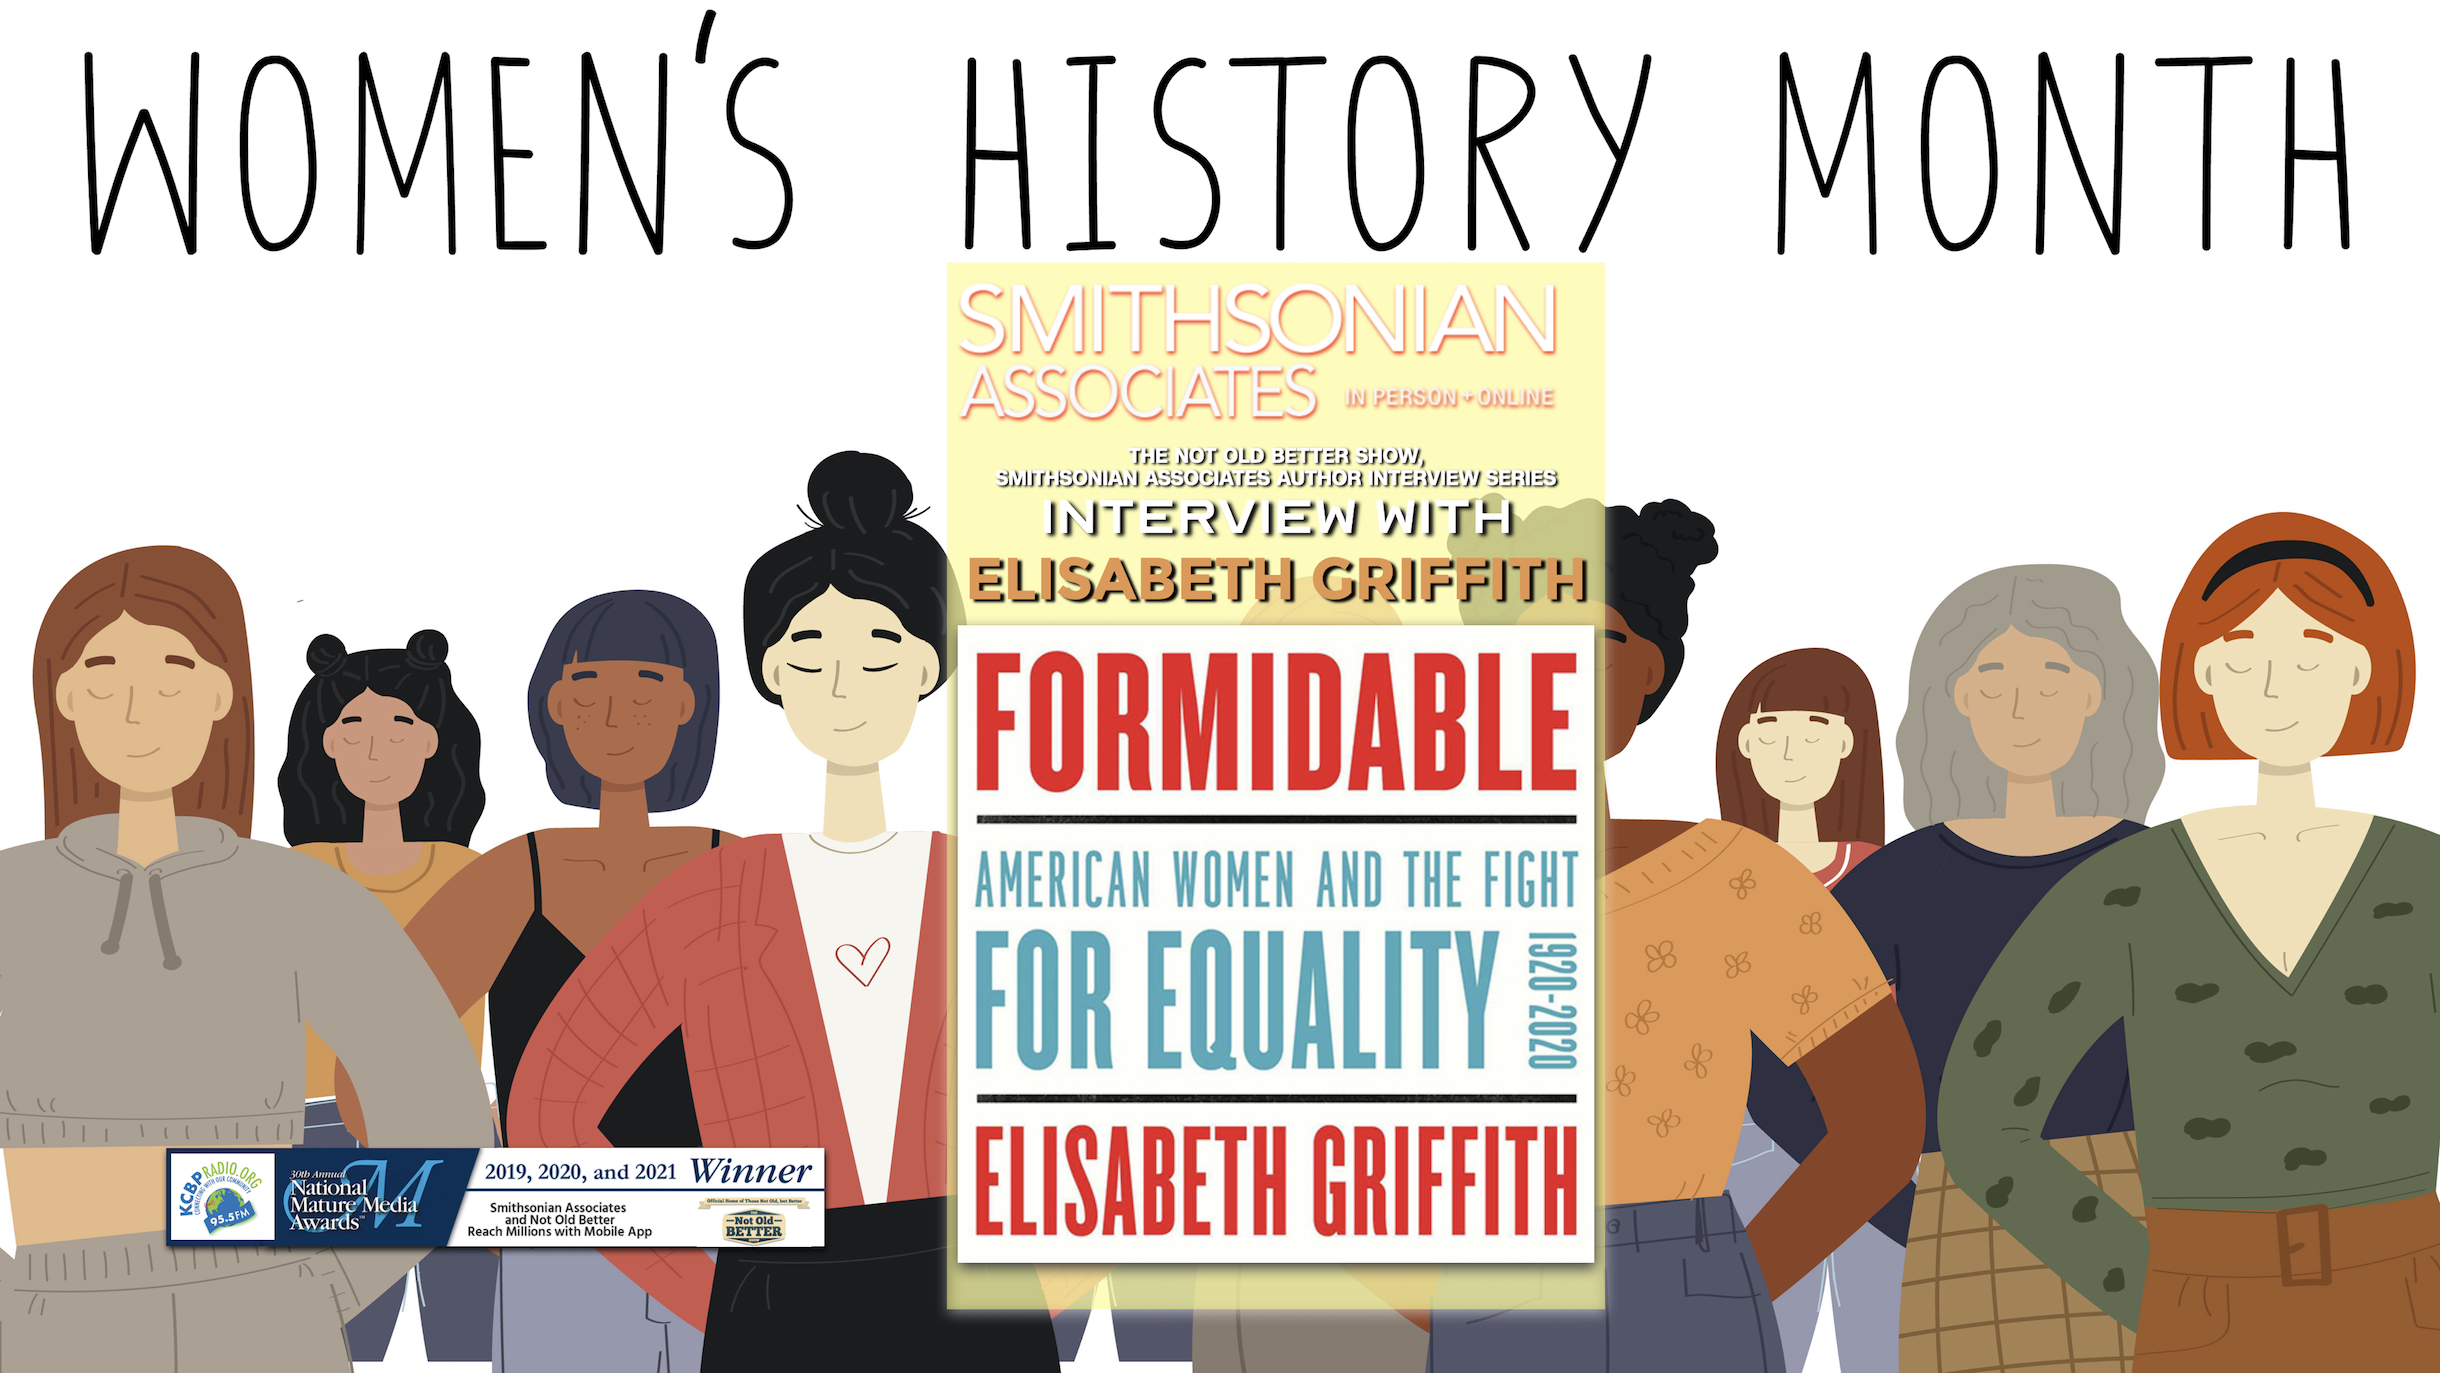 American Women and the Fight for Equality – Elisabeth Griffith